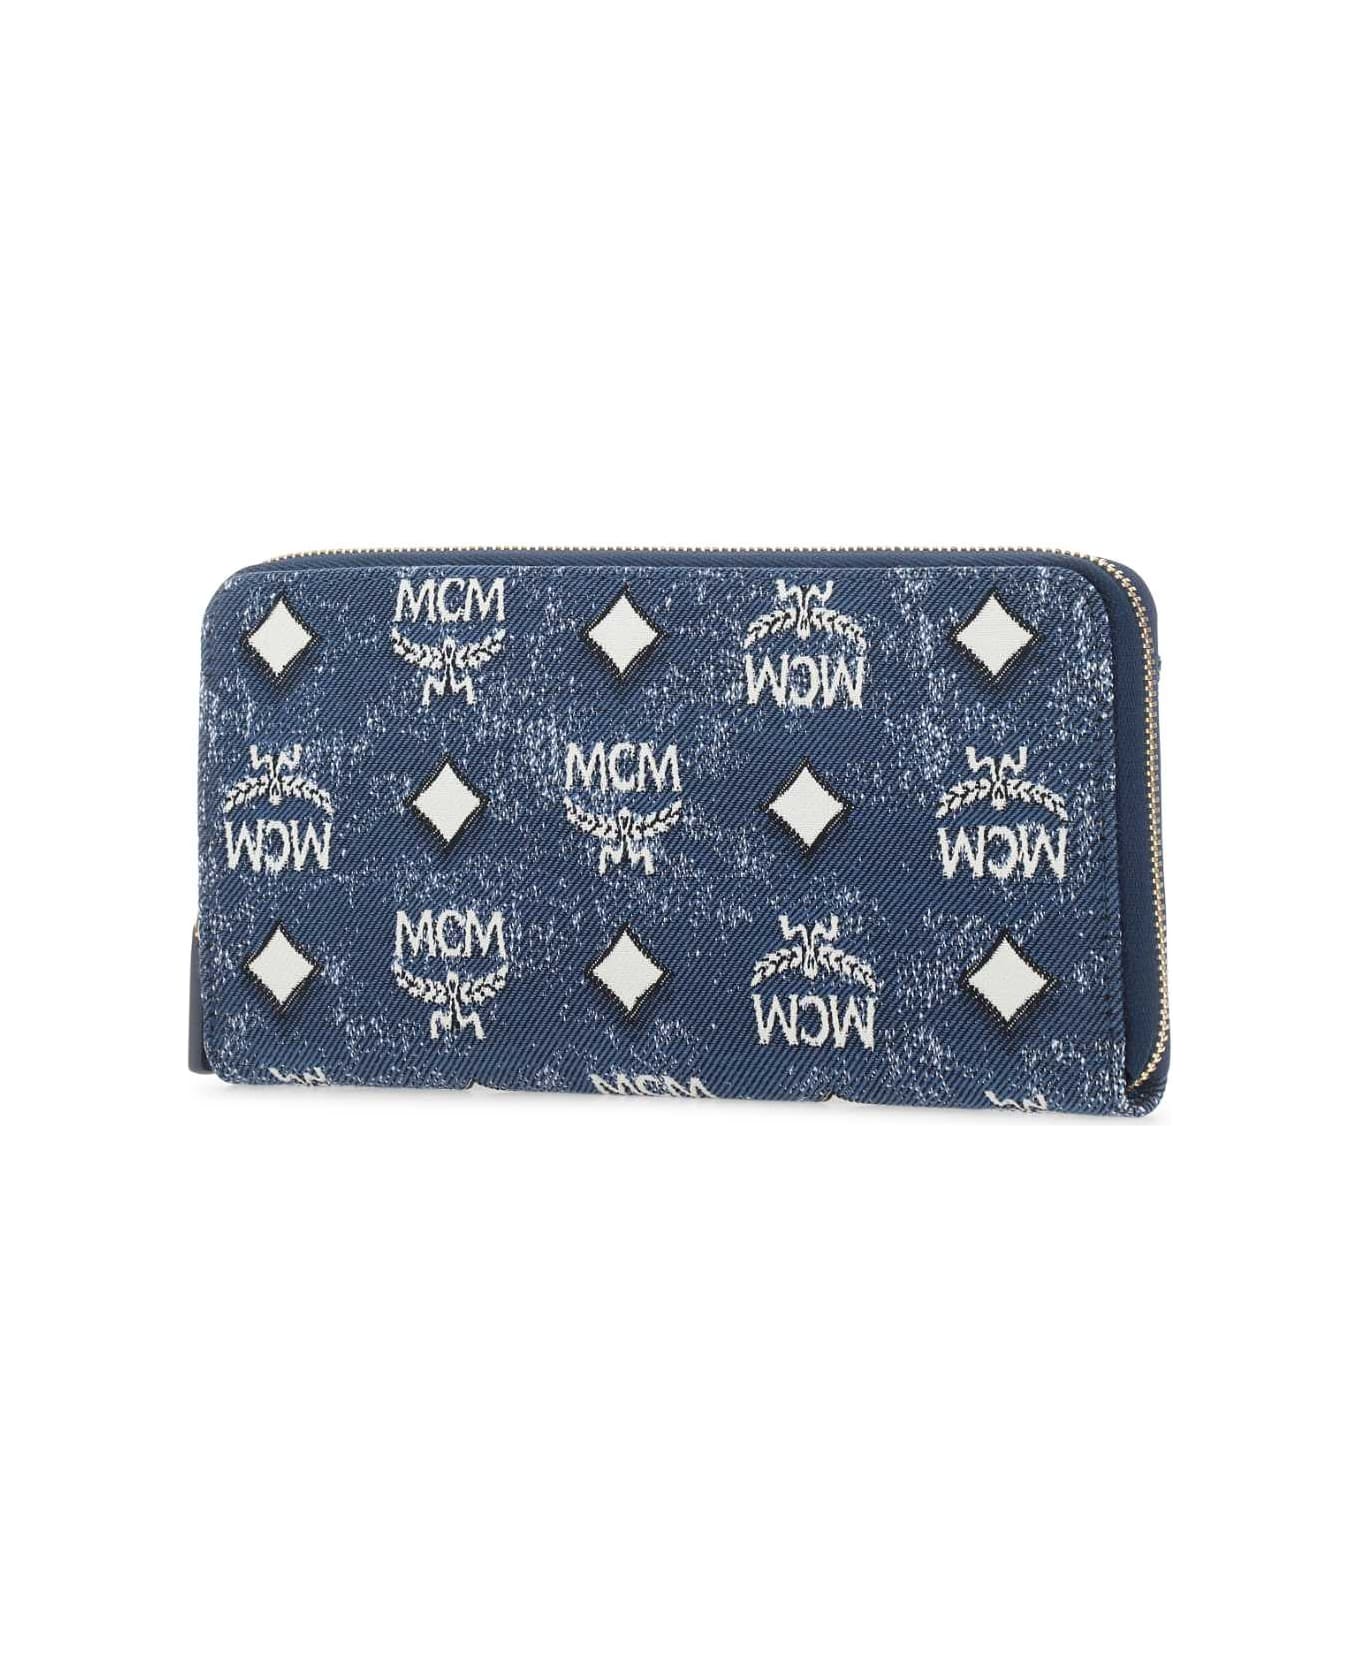 MCM Embroidered Canvas Wallet - LE